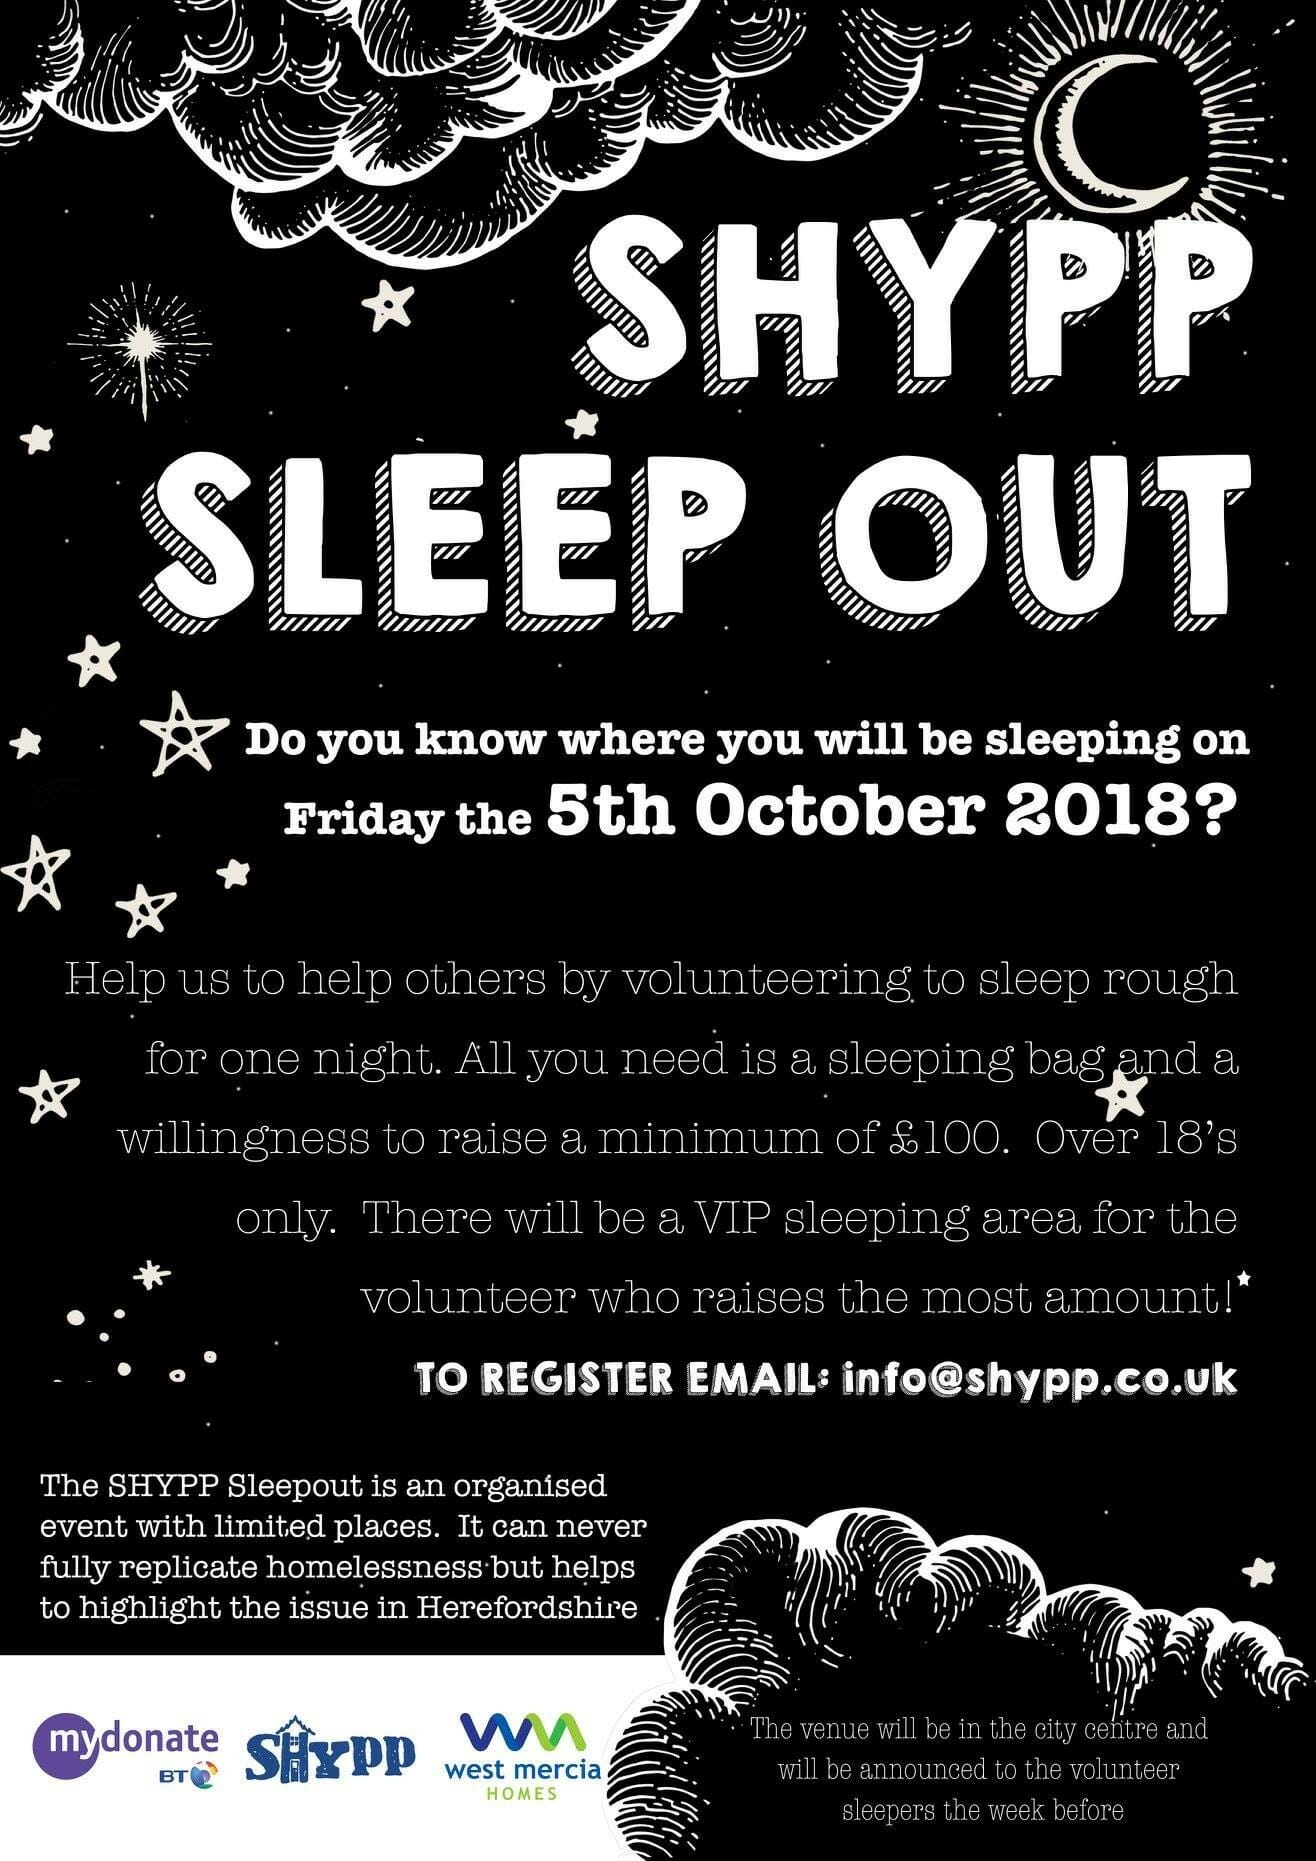 SHYPP Sleep Out – Friday 5th October